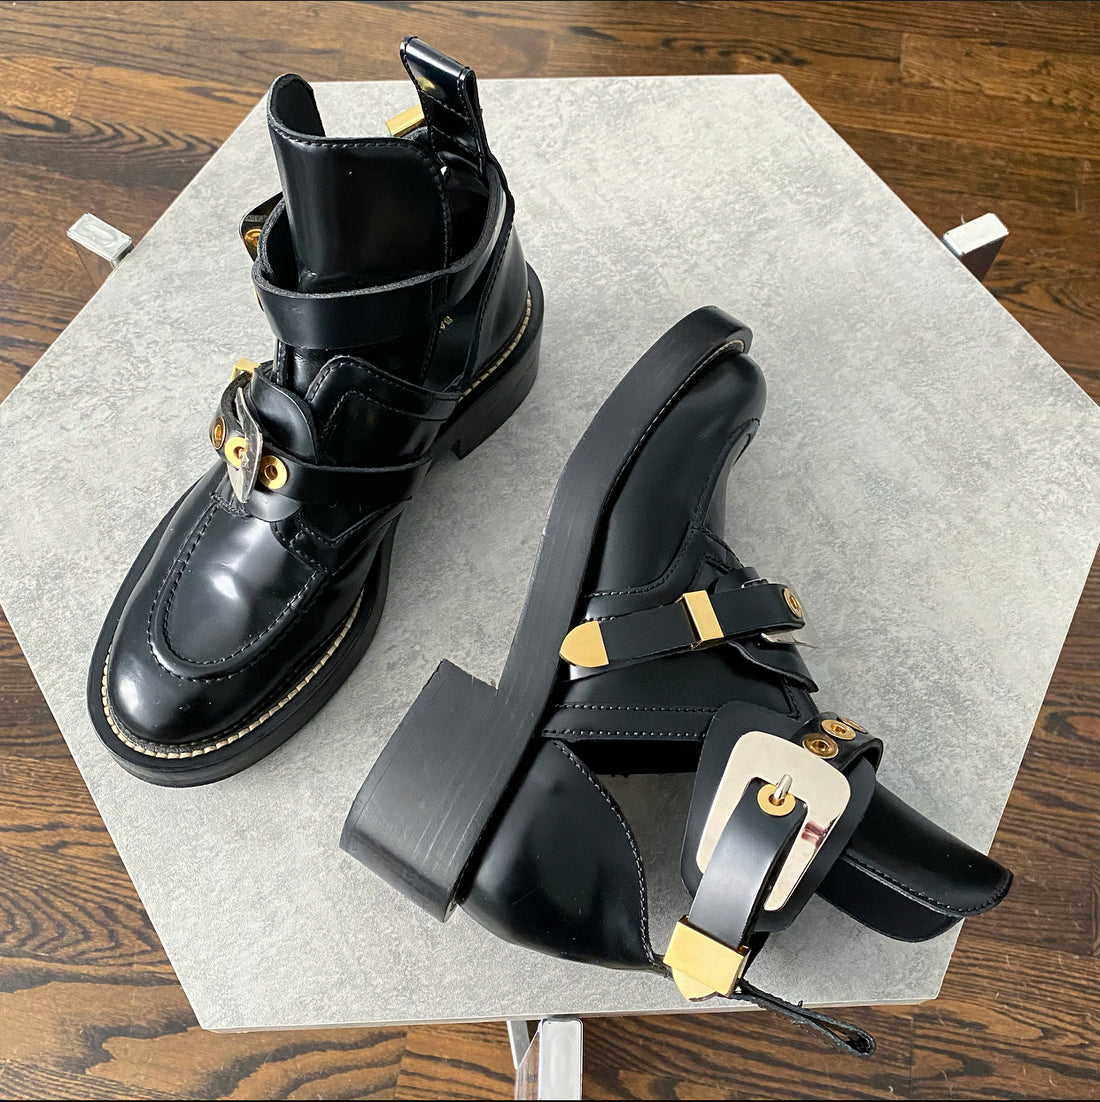 The Look For Less Balenciaga Ceinture Ankle Boot  1275 vs 100  THE  BALLER ON A BUDGET  An Affordable Fashion Beauty  Lifestyle Blog